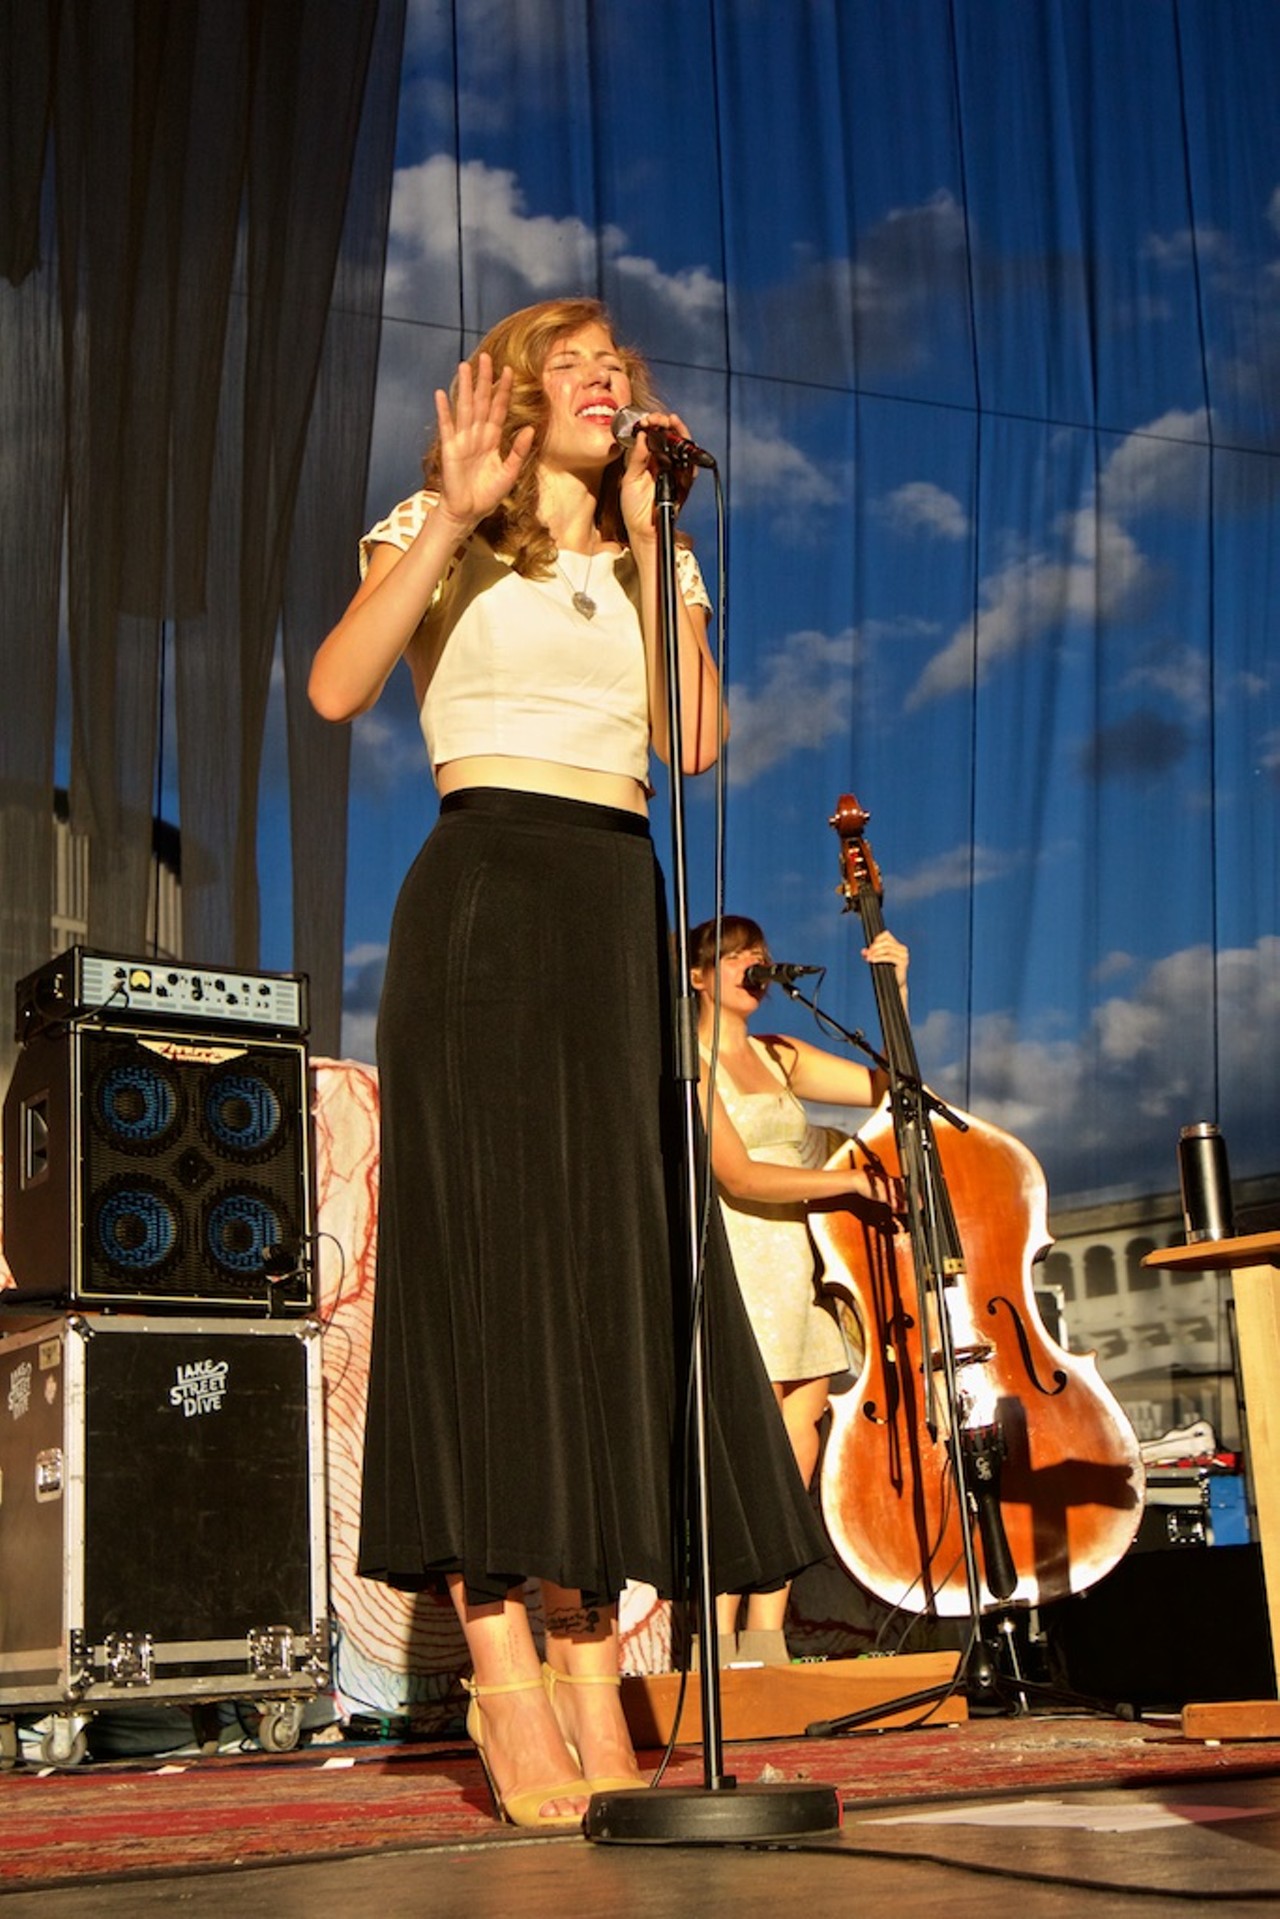 The Avett Brothers and Lake Street Dive Performing at Jacobs Pavilion at Nautica